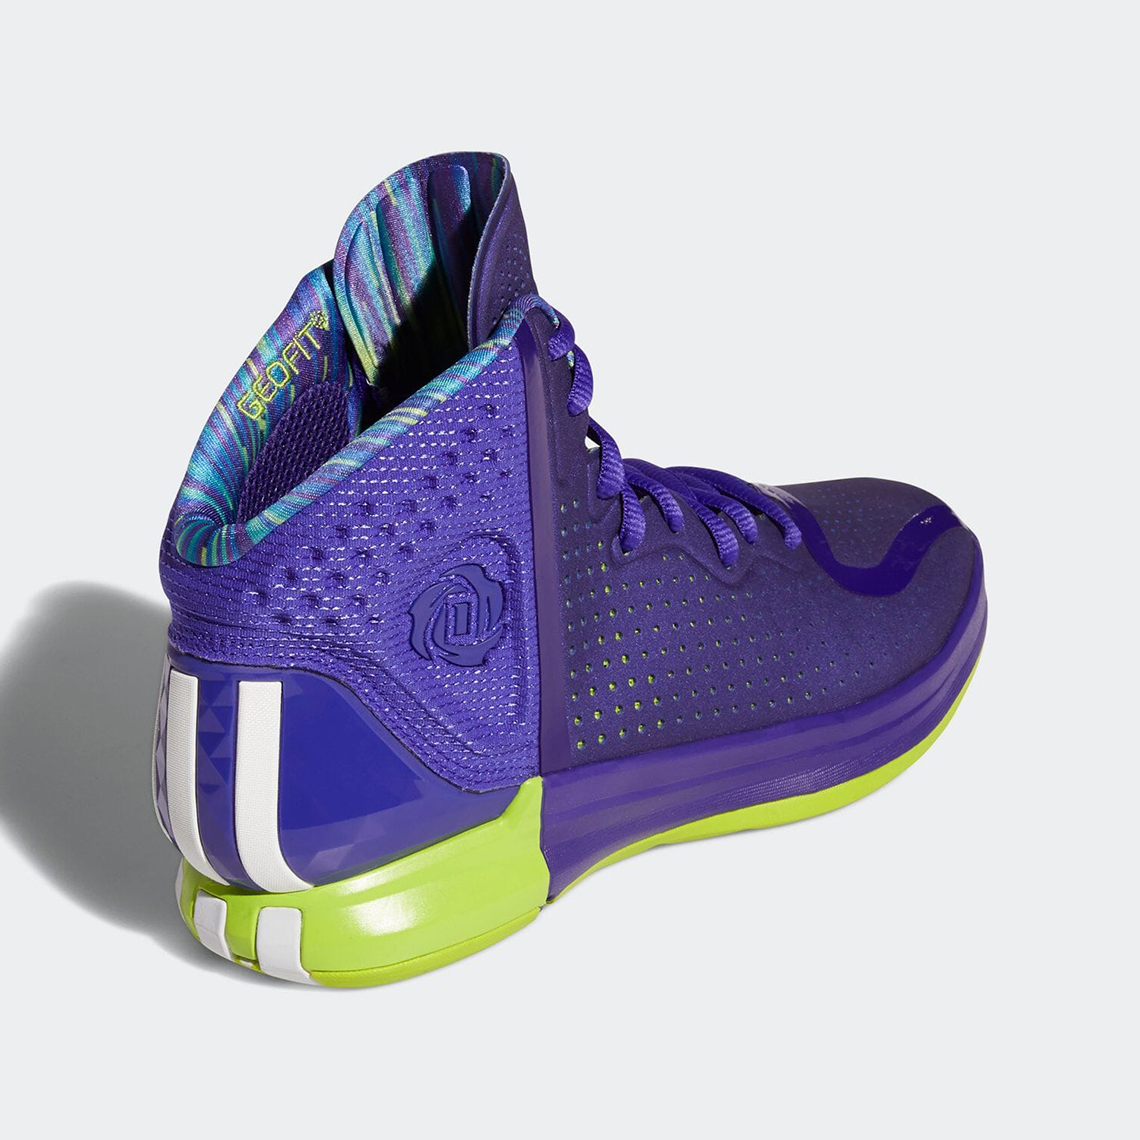 Adidas D Rose 4 Chicago Nightfall Release Date 7